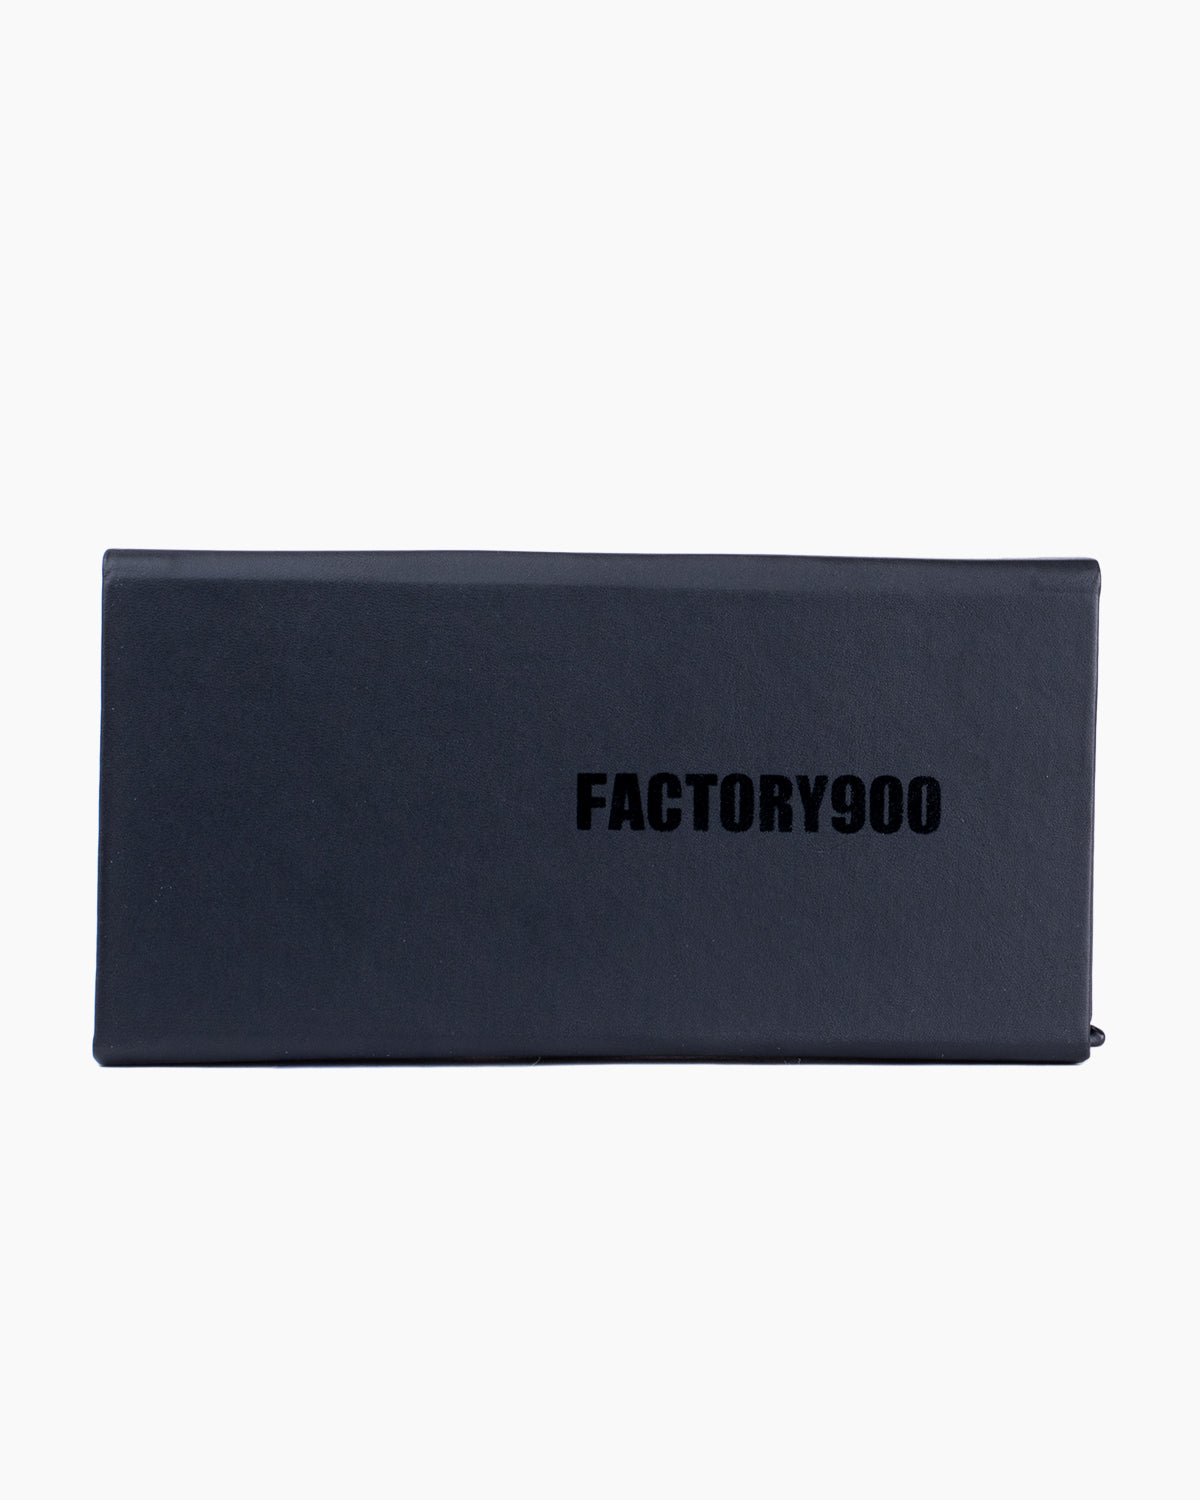 Factory 900 - MF002 - 01 | glasses bar:  Marie-Sophie Dion